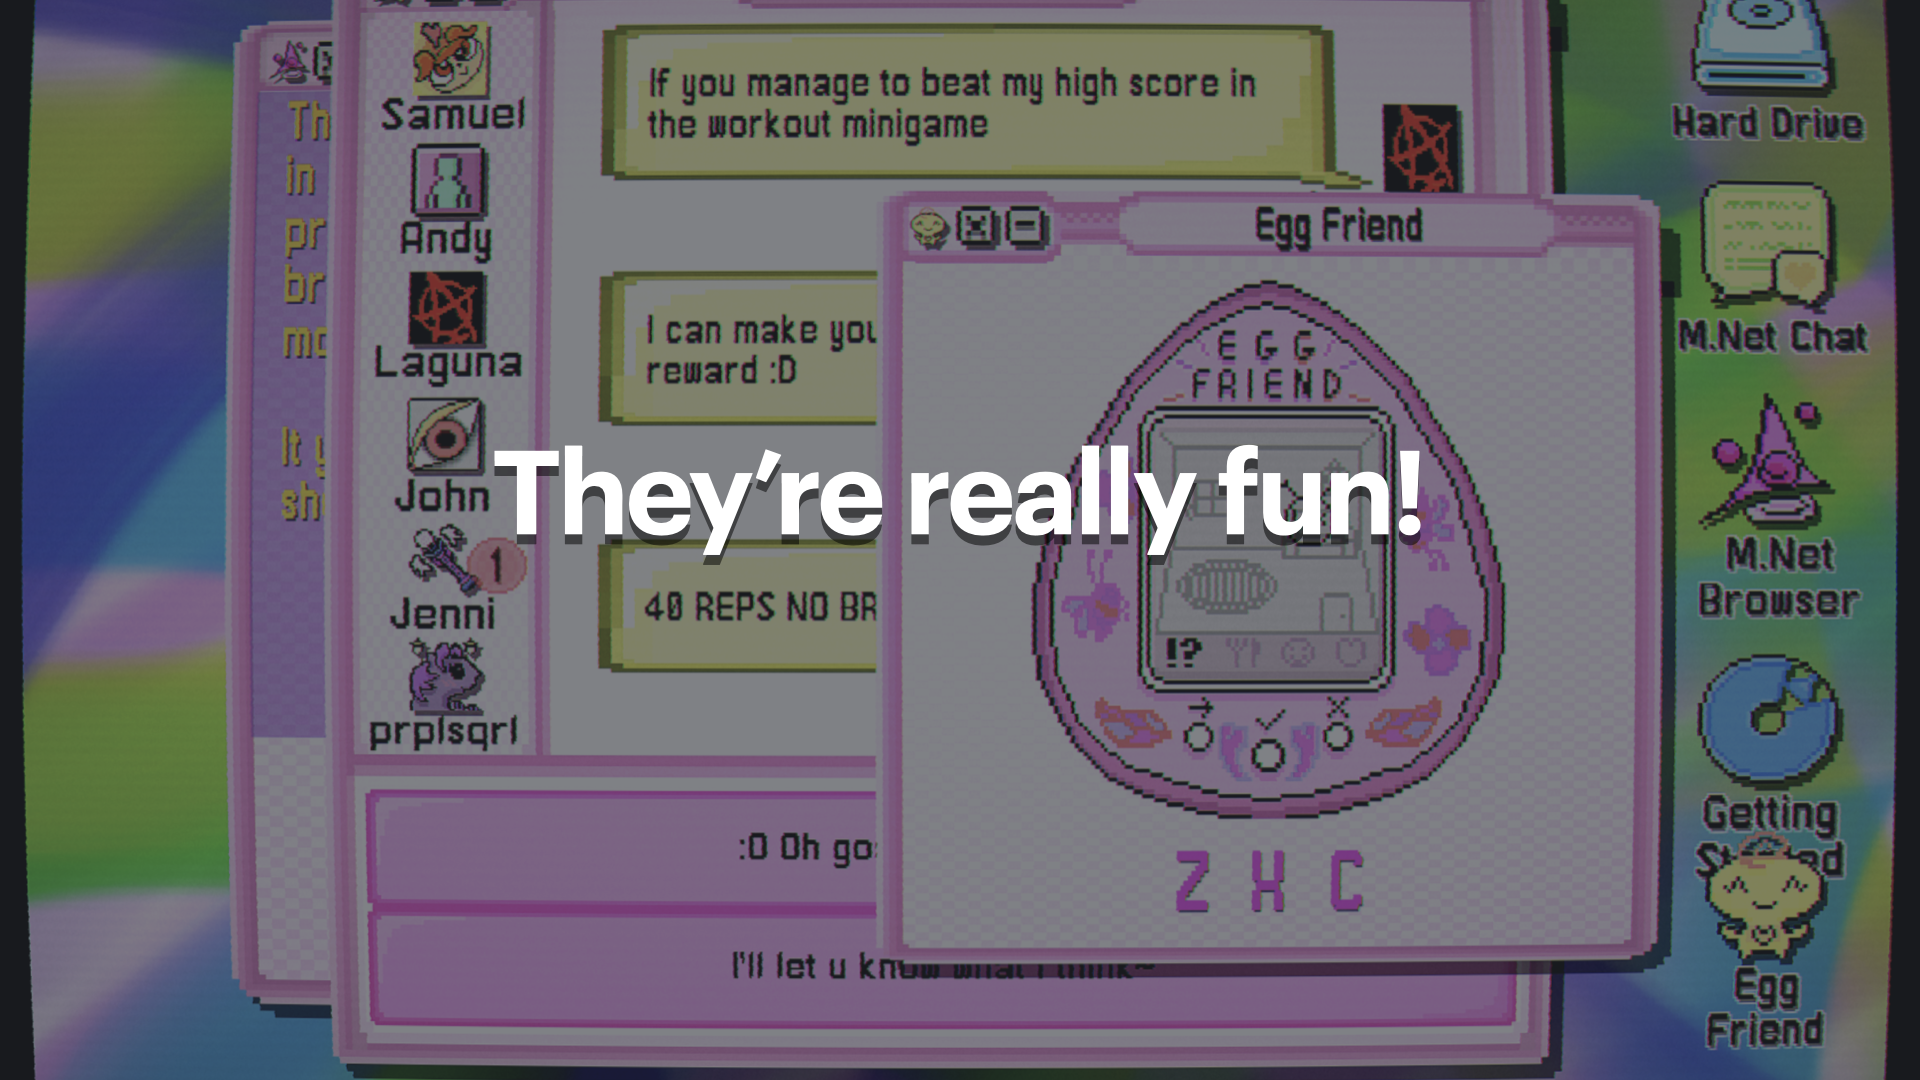 Text: They’re really fun!